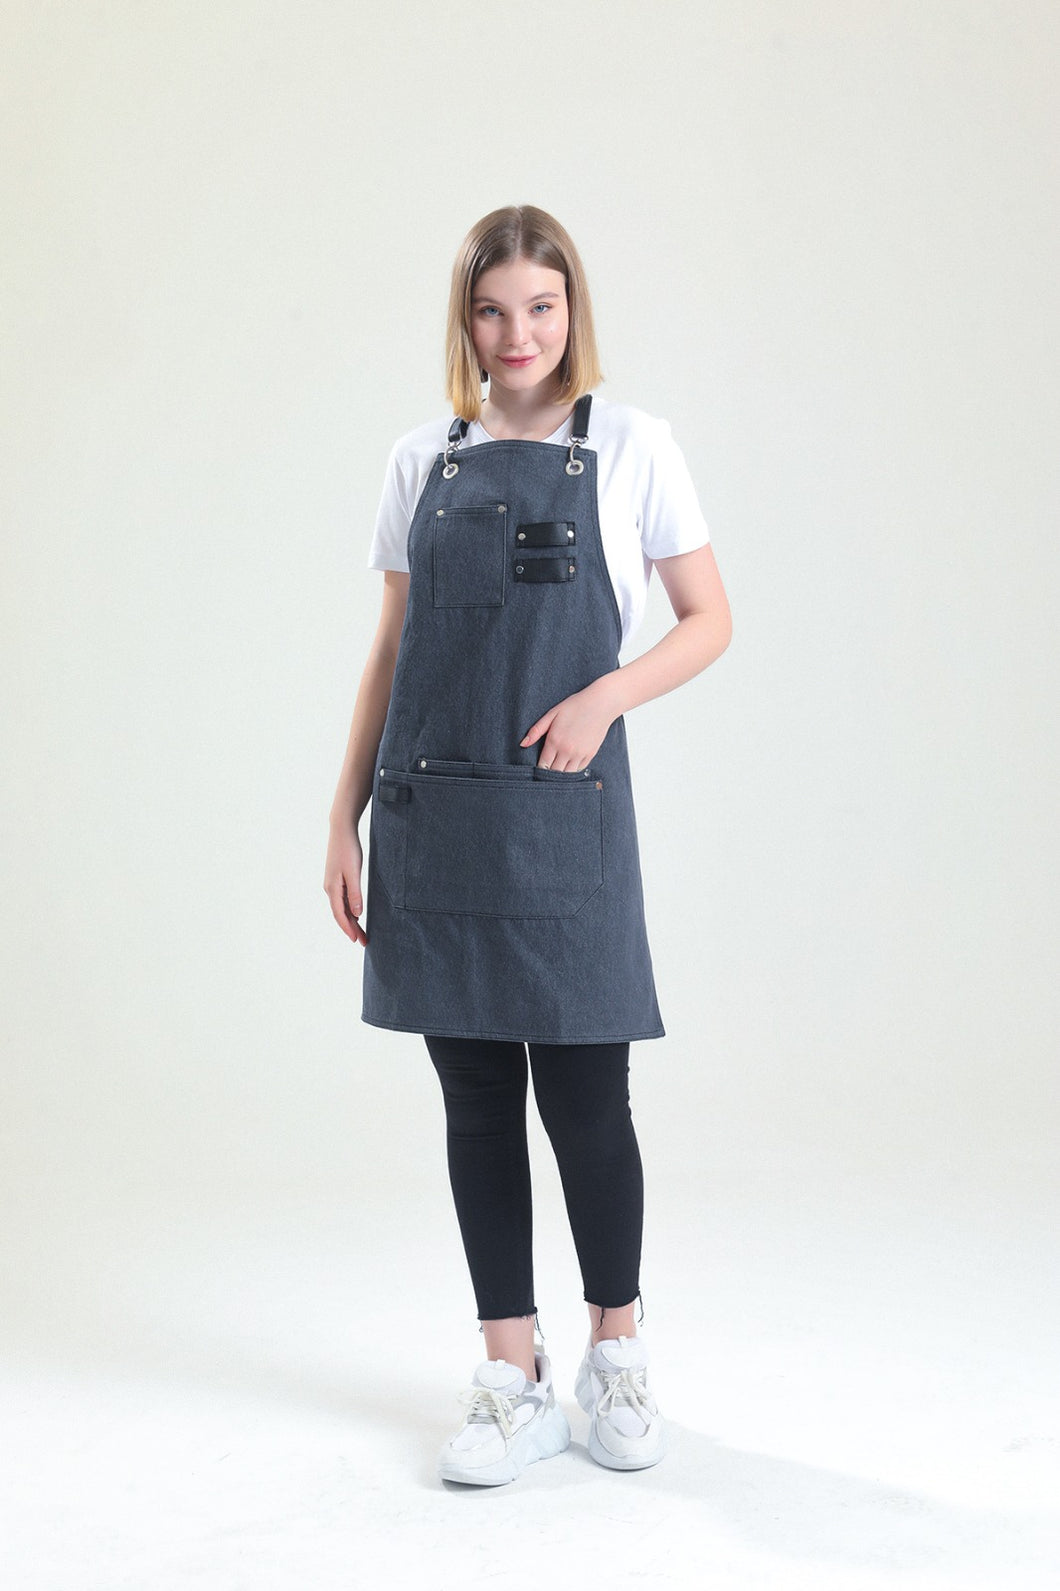 Lasting and Durable Unisex Denim Apron with Adjustable Straps